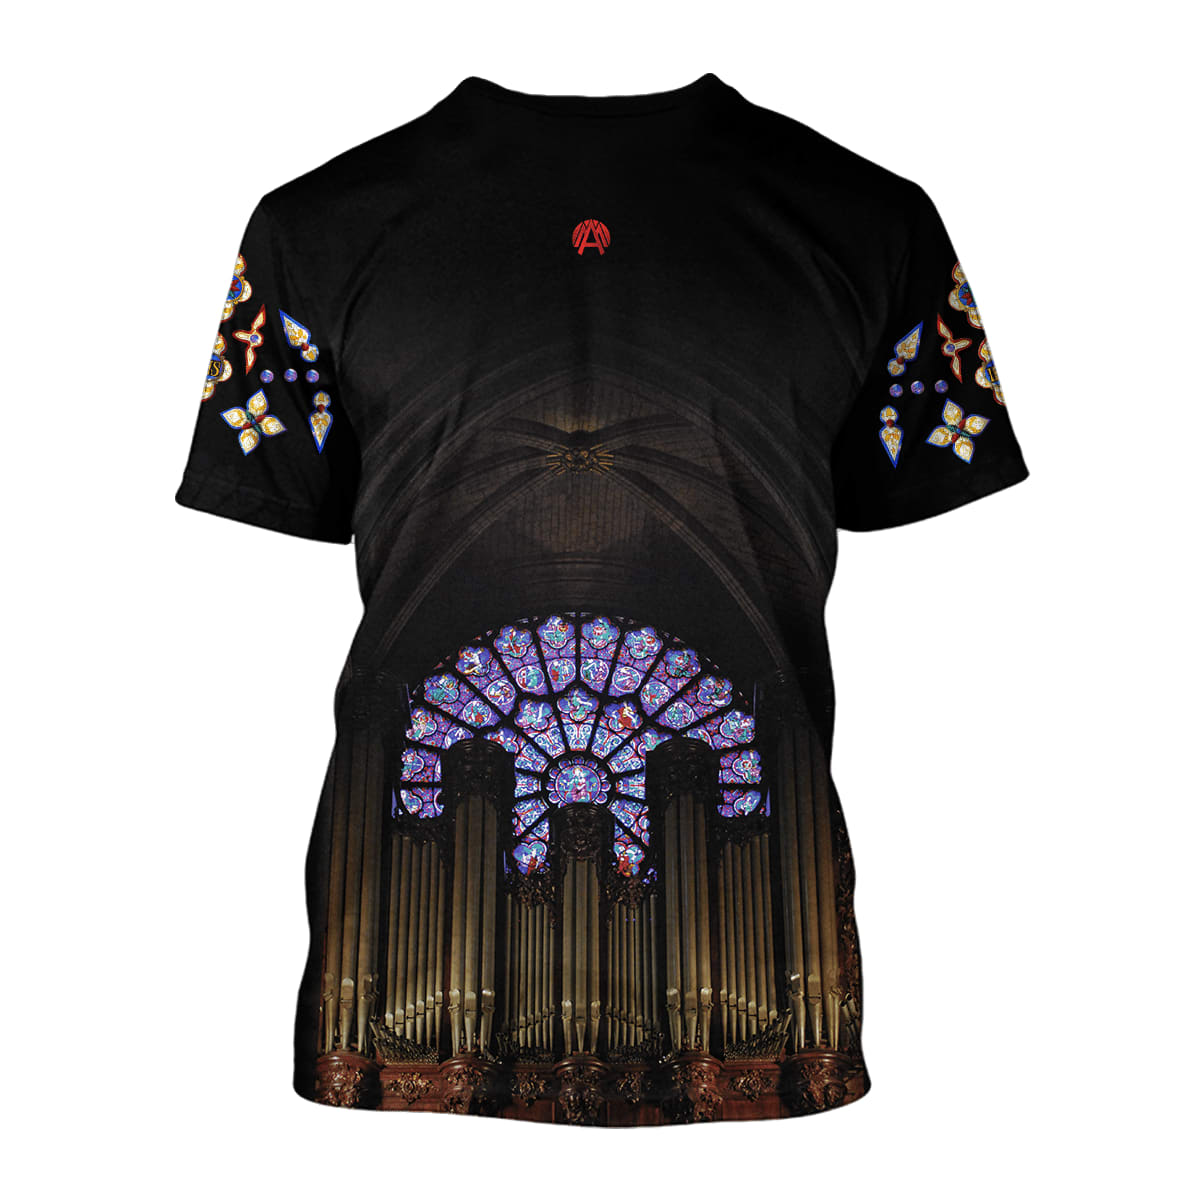 Cathedrals Stained Glass Windows Christian Shirt - Christian 3d Shirts For Men Women